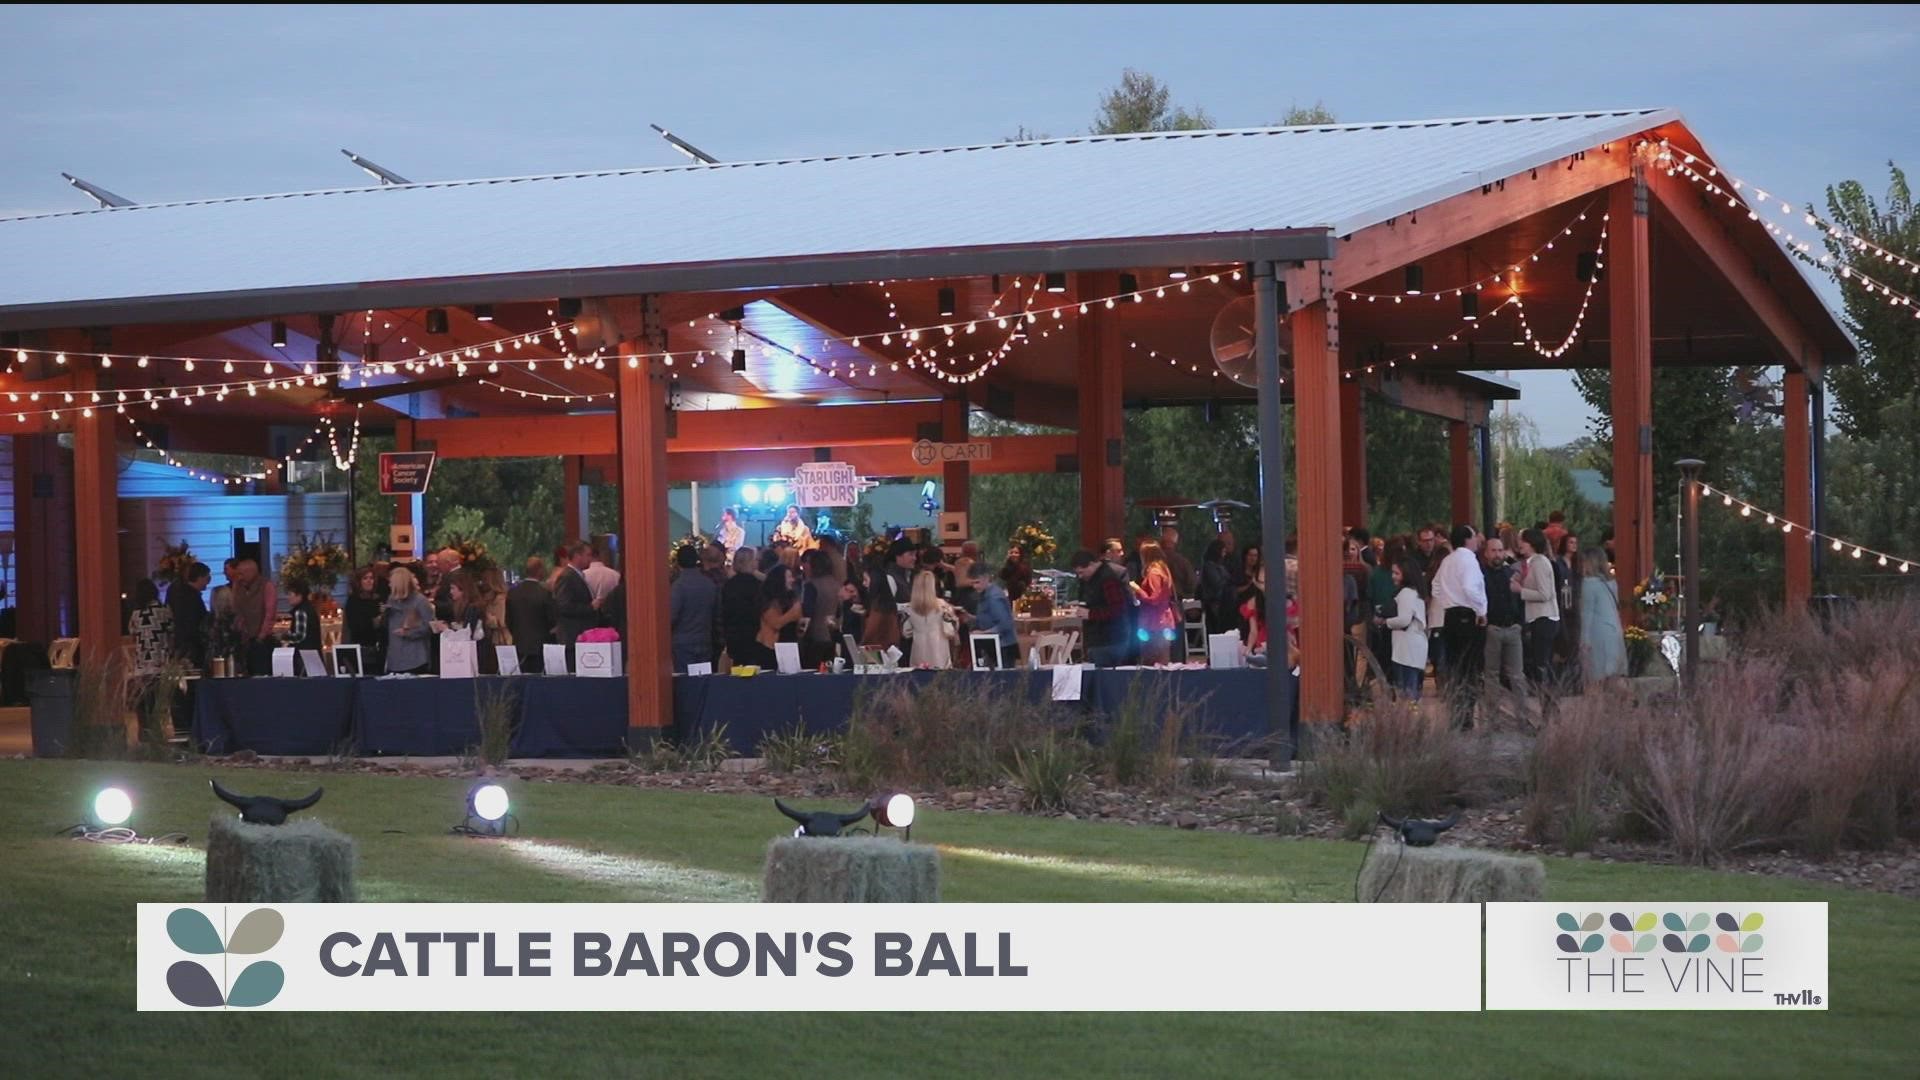 Buying a ticket to the American Cancer Society's Cattle Baron's Ball will help fund transportation grants for cancer patients in Arkansas.